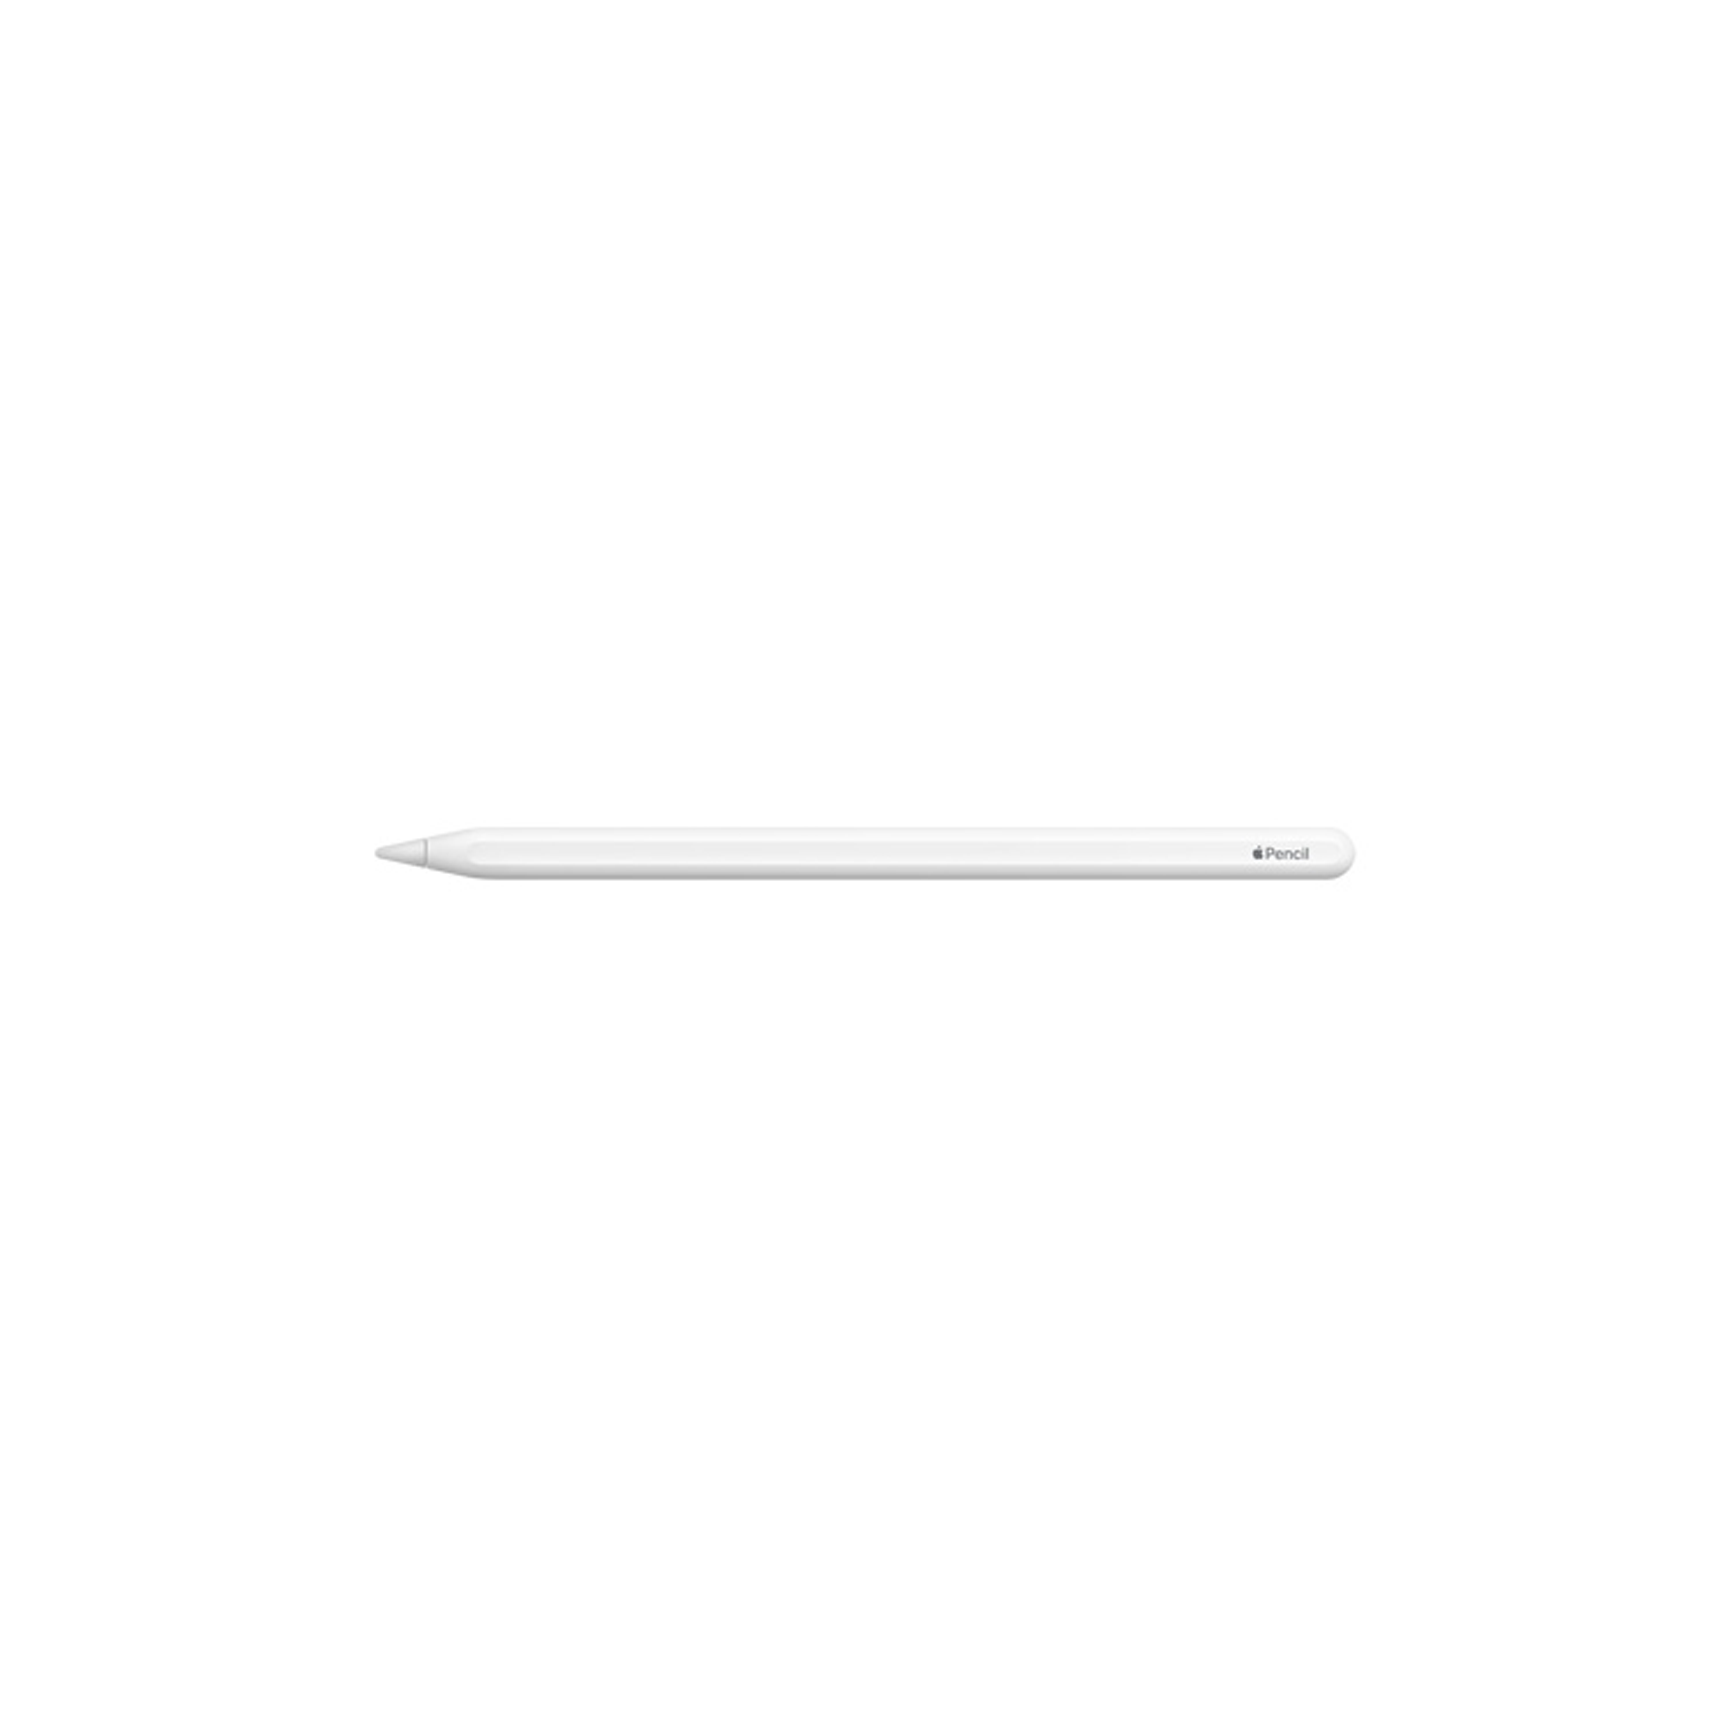 Apple Pencil (2nd Generation) for sale